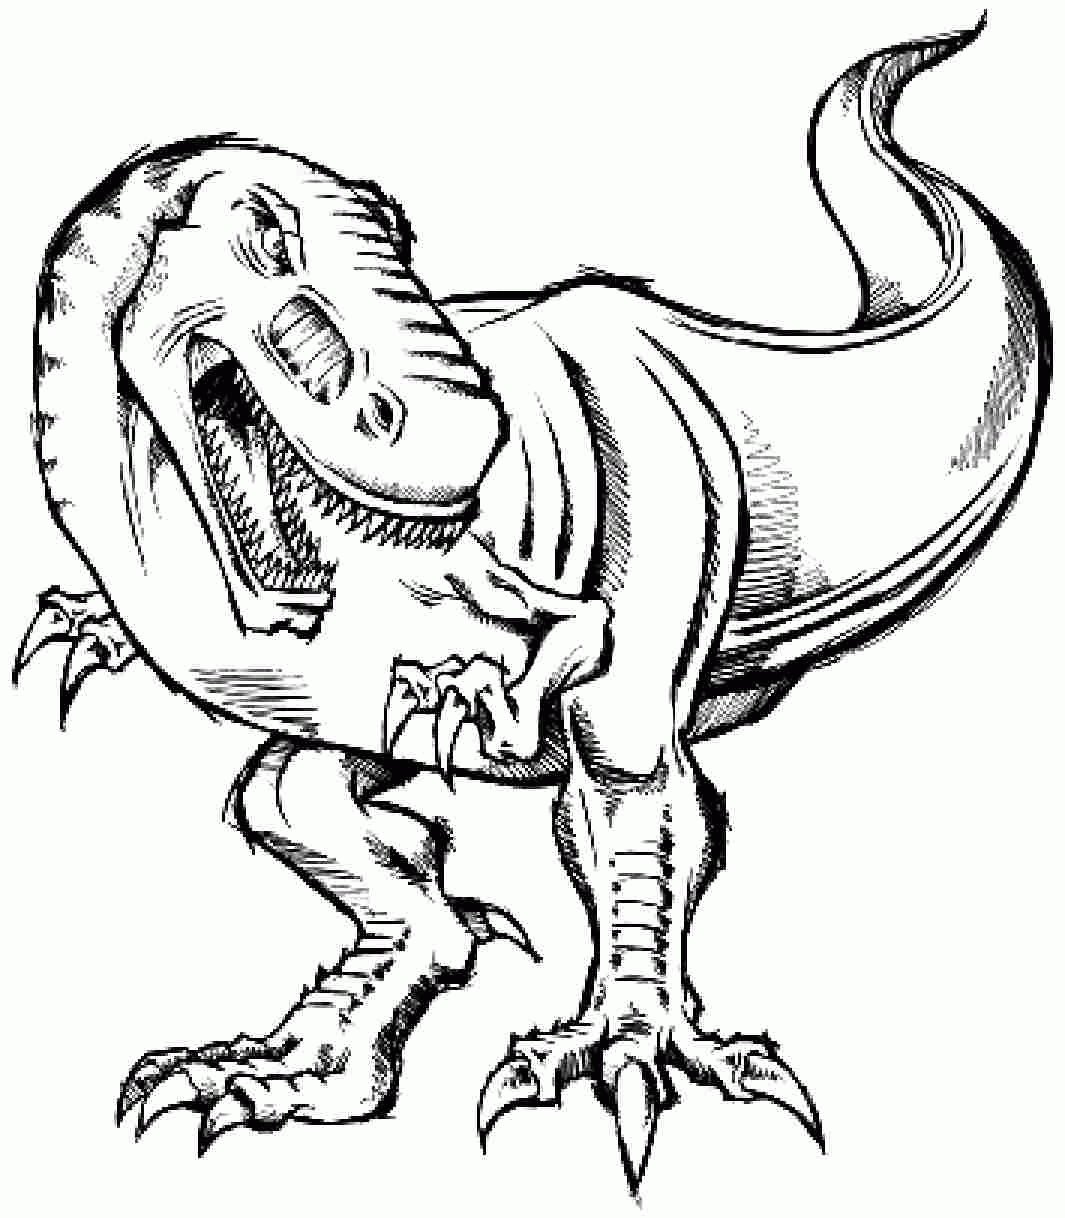 Marvelous Picture of Scary Dinosaur Coloring Pages - vicoms.info